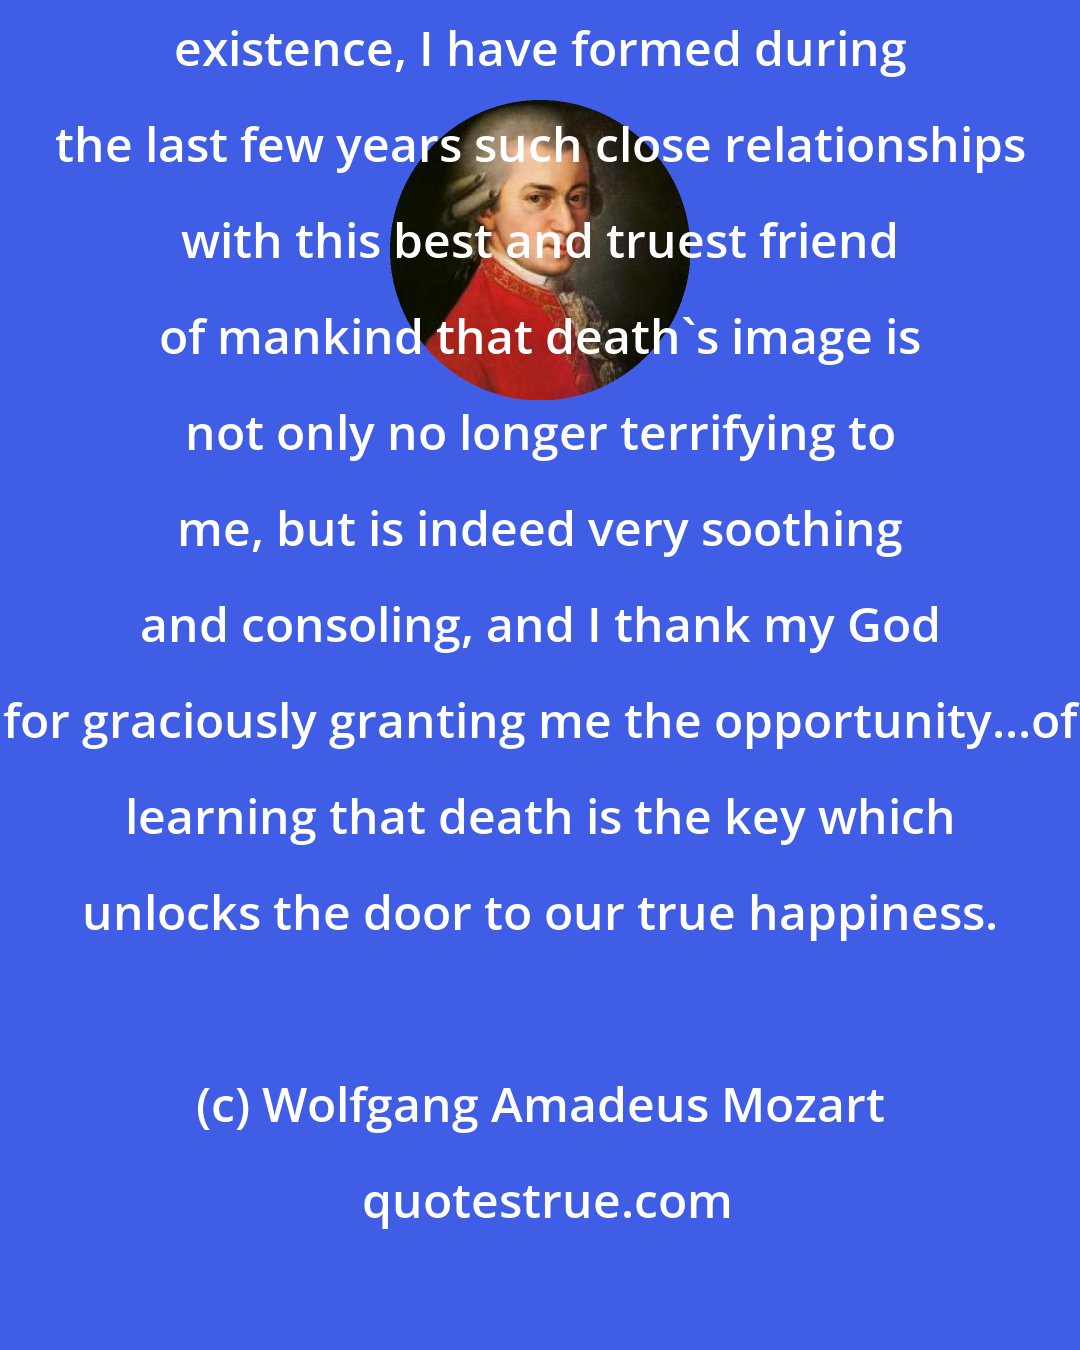 Wolfgang Amadeus Mozart: As death, when we come to consider it closely, is the true goal of our existence, I have formed during the last few years such close relationships with this best and truest friend of mankind that death's image is not only no longer terrifying to me, but is indeed very soothing and consoling, and I thank my God for graciously granting me the opportunity...of learning that death is the key which unlocks the door to our true happiness.